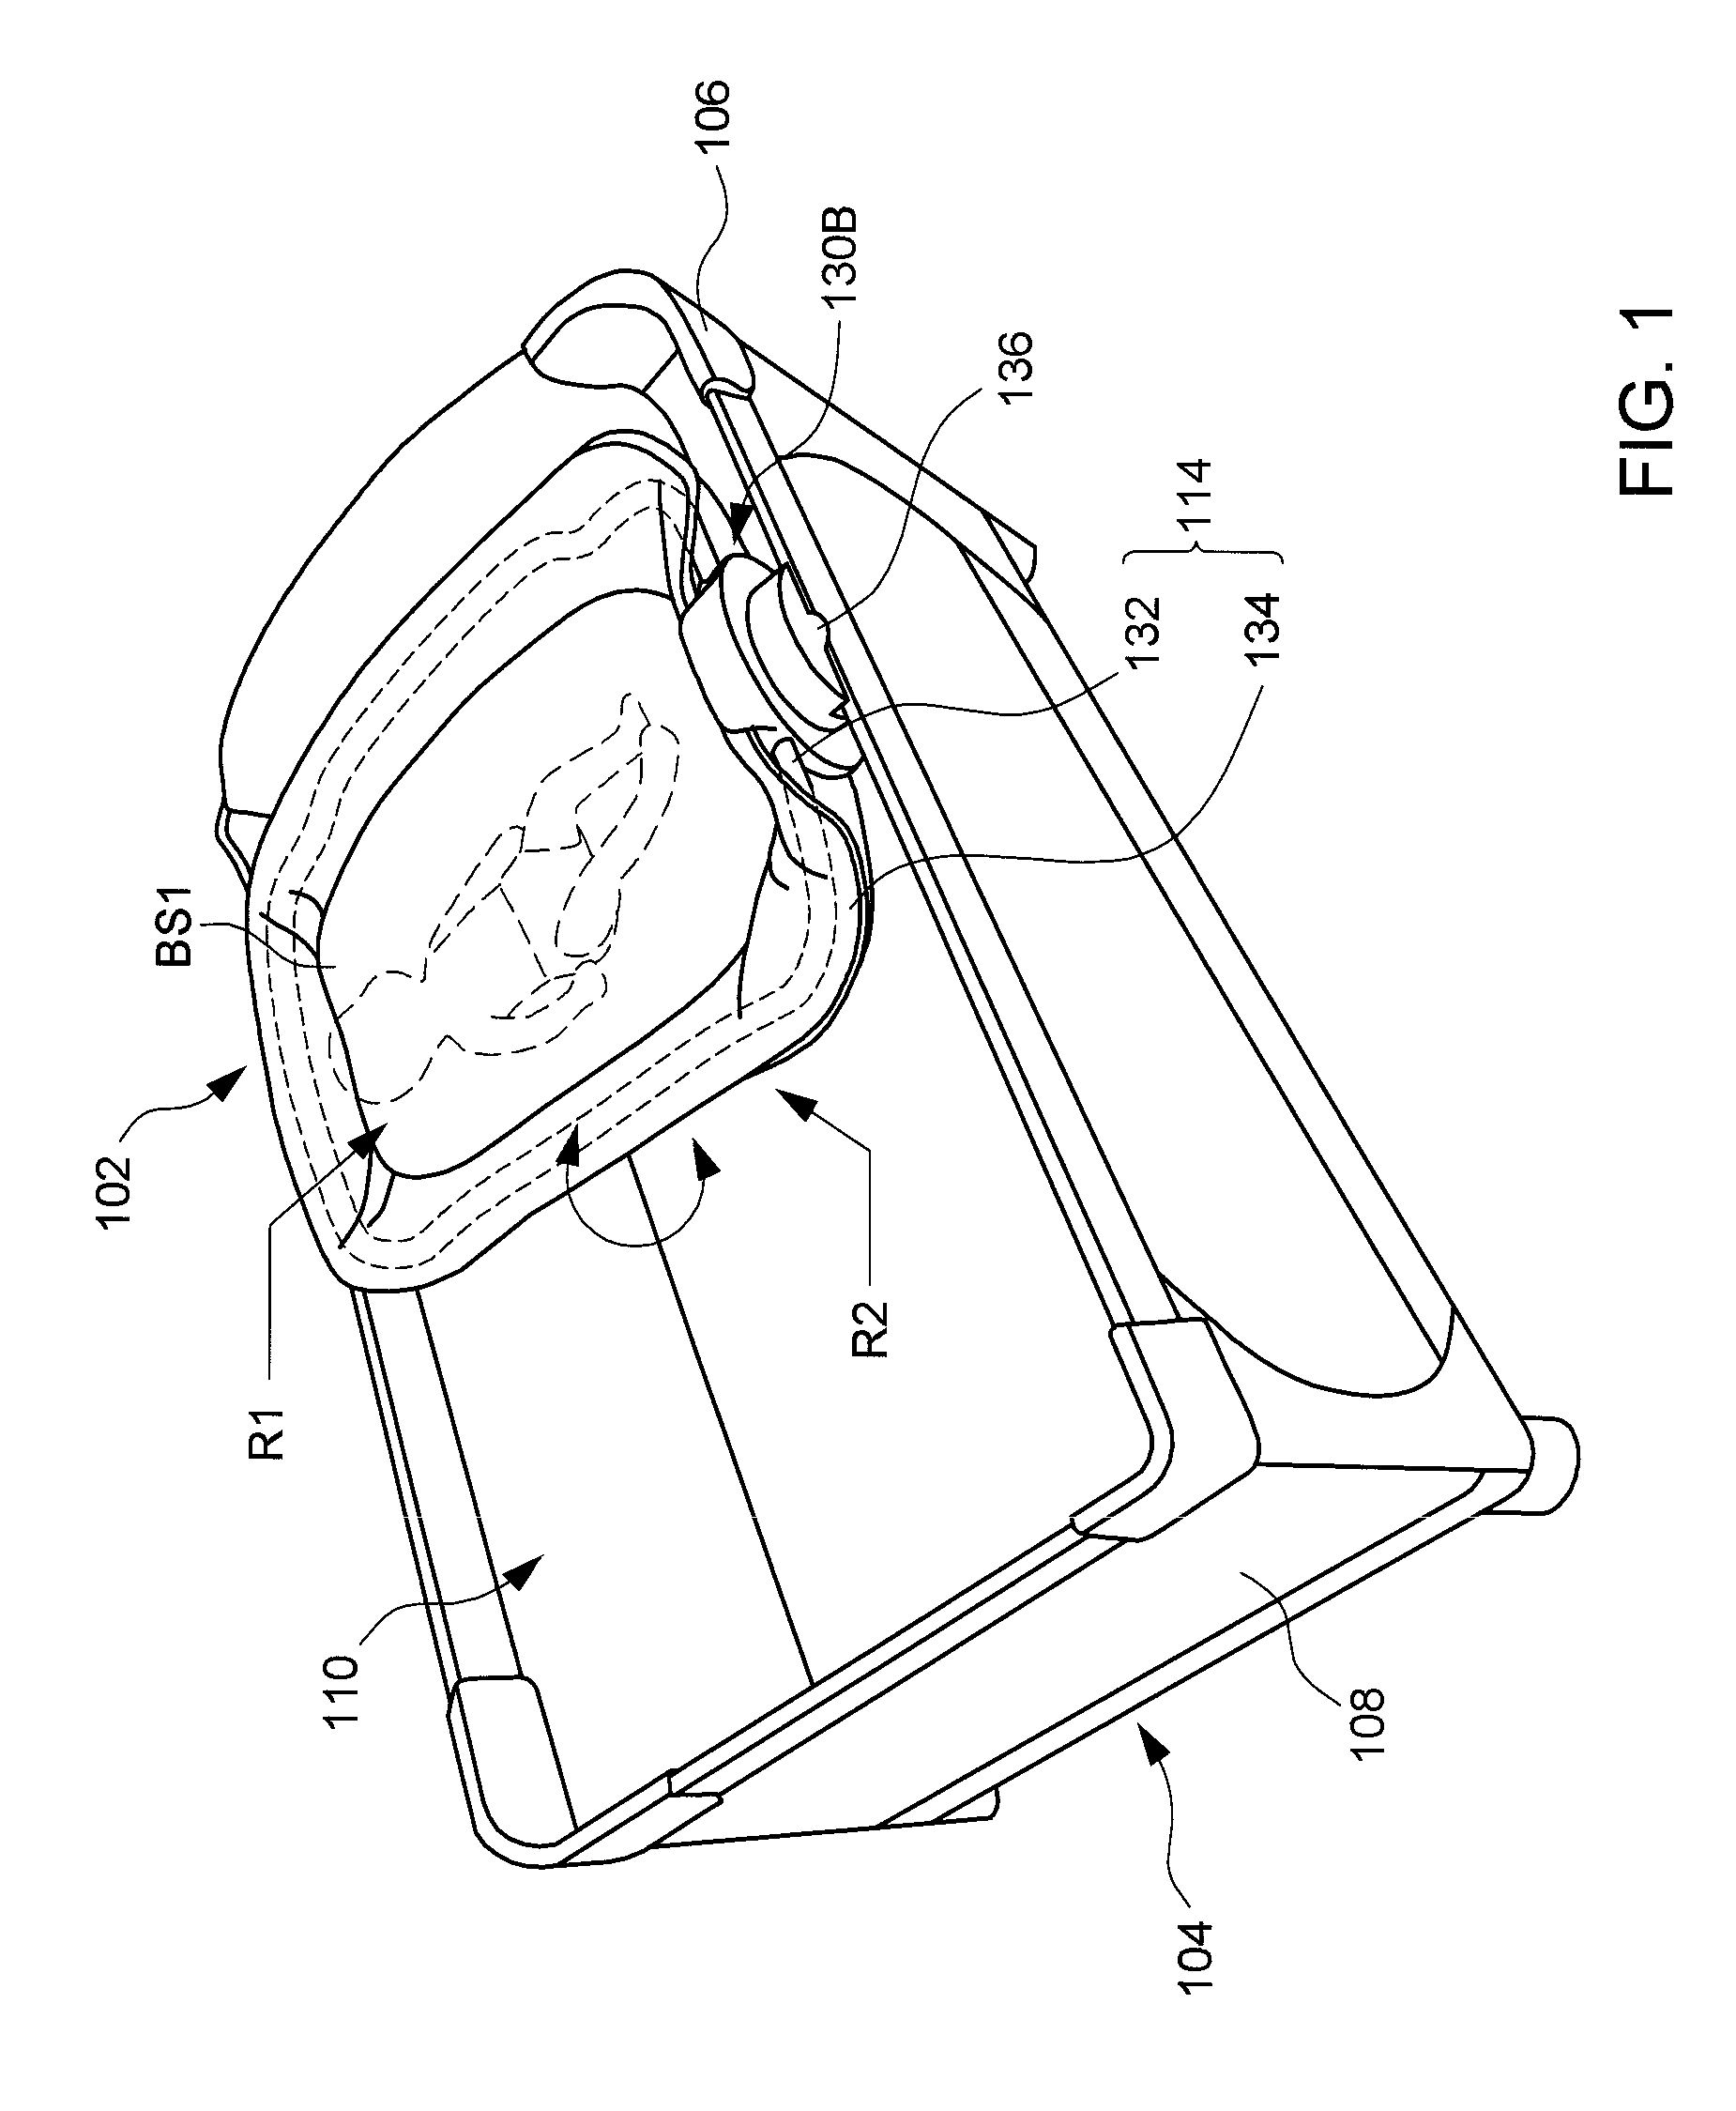 Child holding accessory suitable for use with a play yard